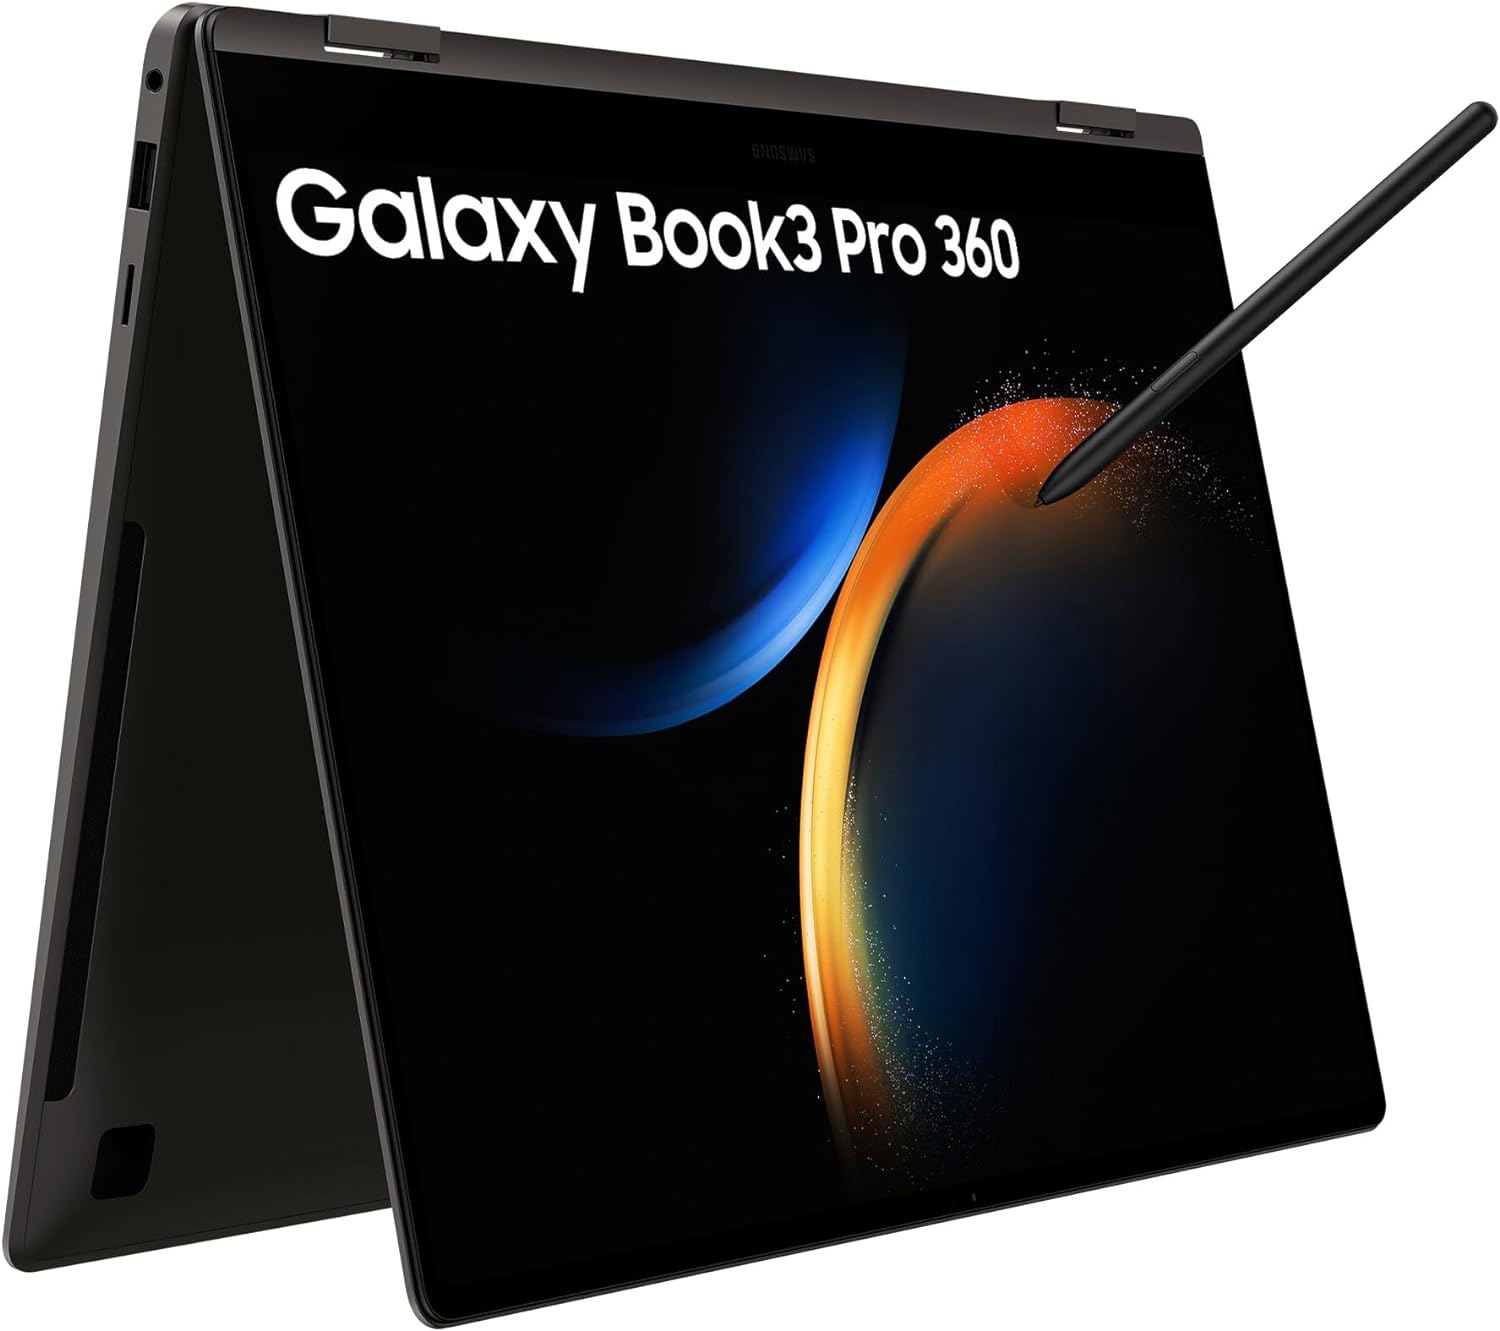 Samsung Galaxy Book3 Pro 360 Wi - Fi Laptop, 16 Inch, 13th gen Intel Core i7 Processor, 16GB RAM, 512GB Storage, Graphite - Official   Import  Single ASIN  Import  Multiple ASIN ×Product customization General Description Gallery Review - Amazing Gadgets Outlet